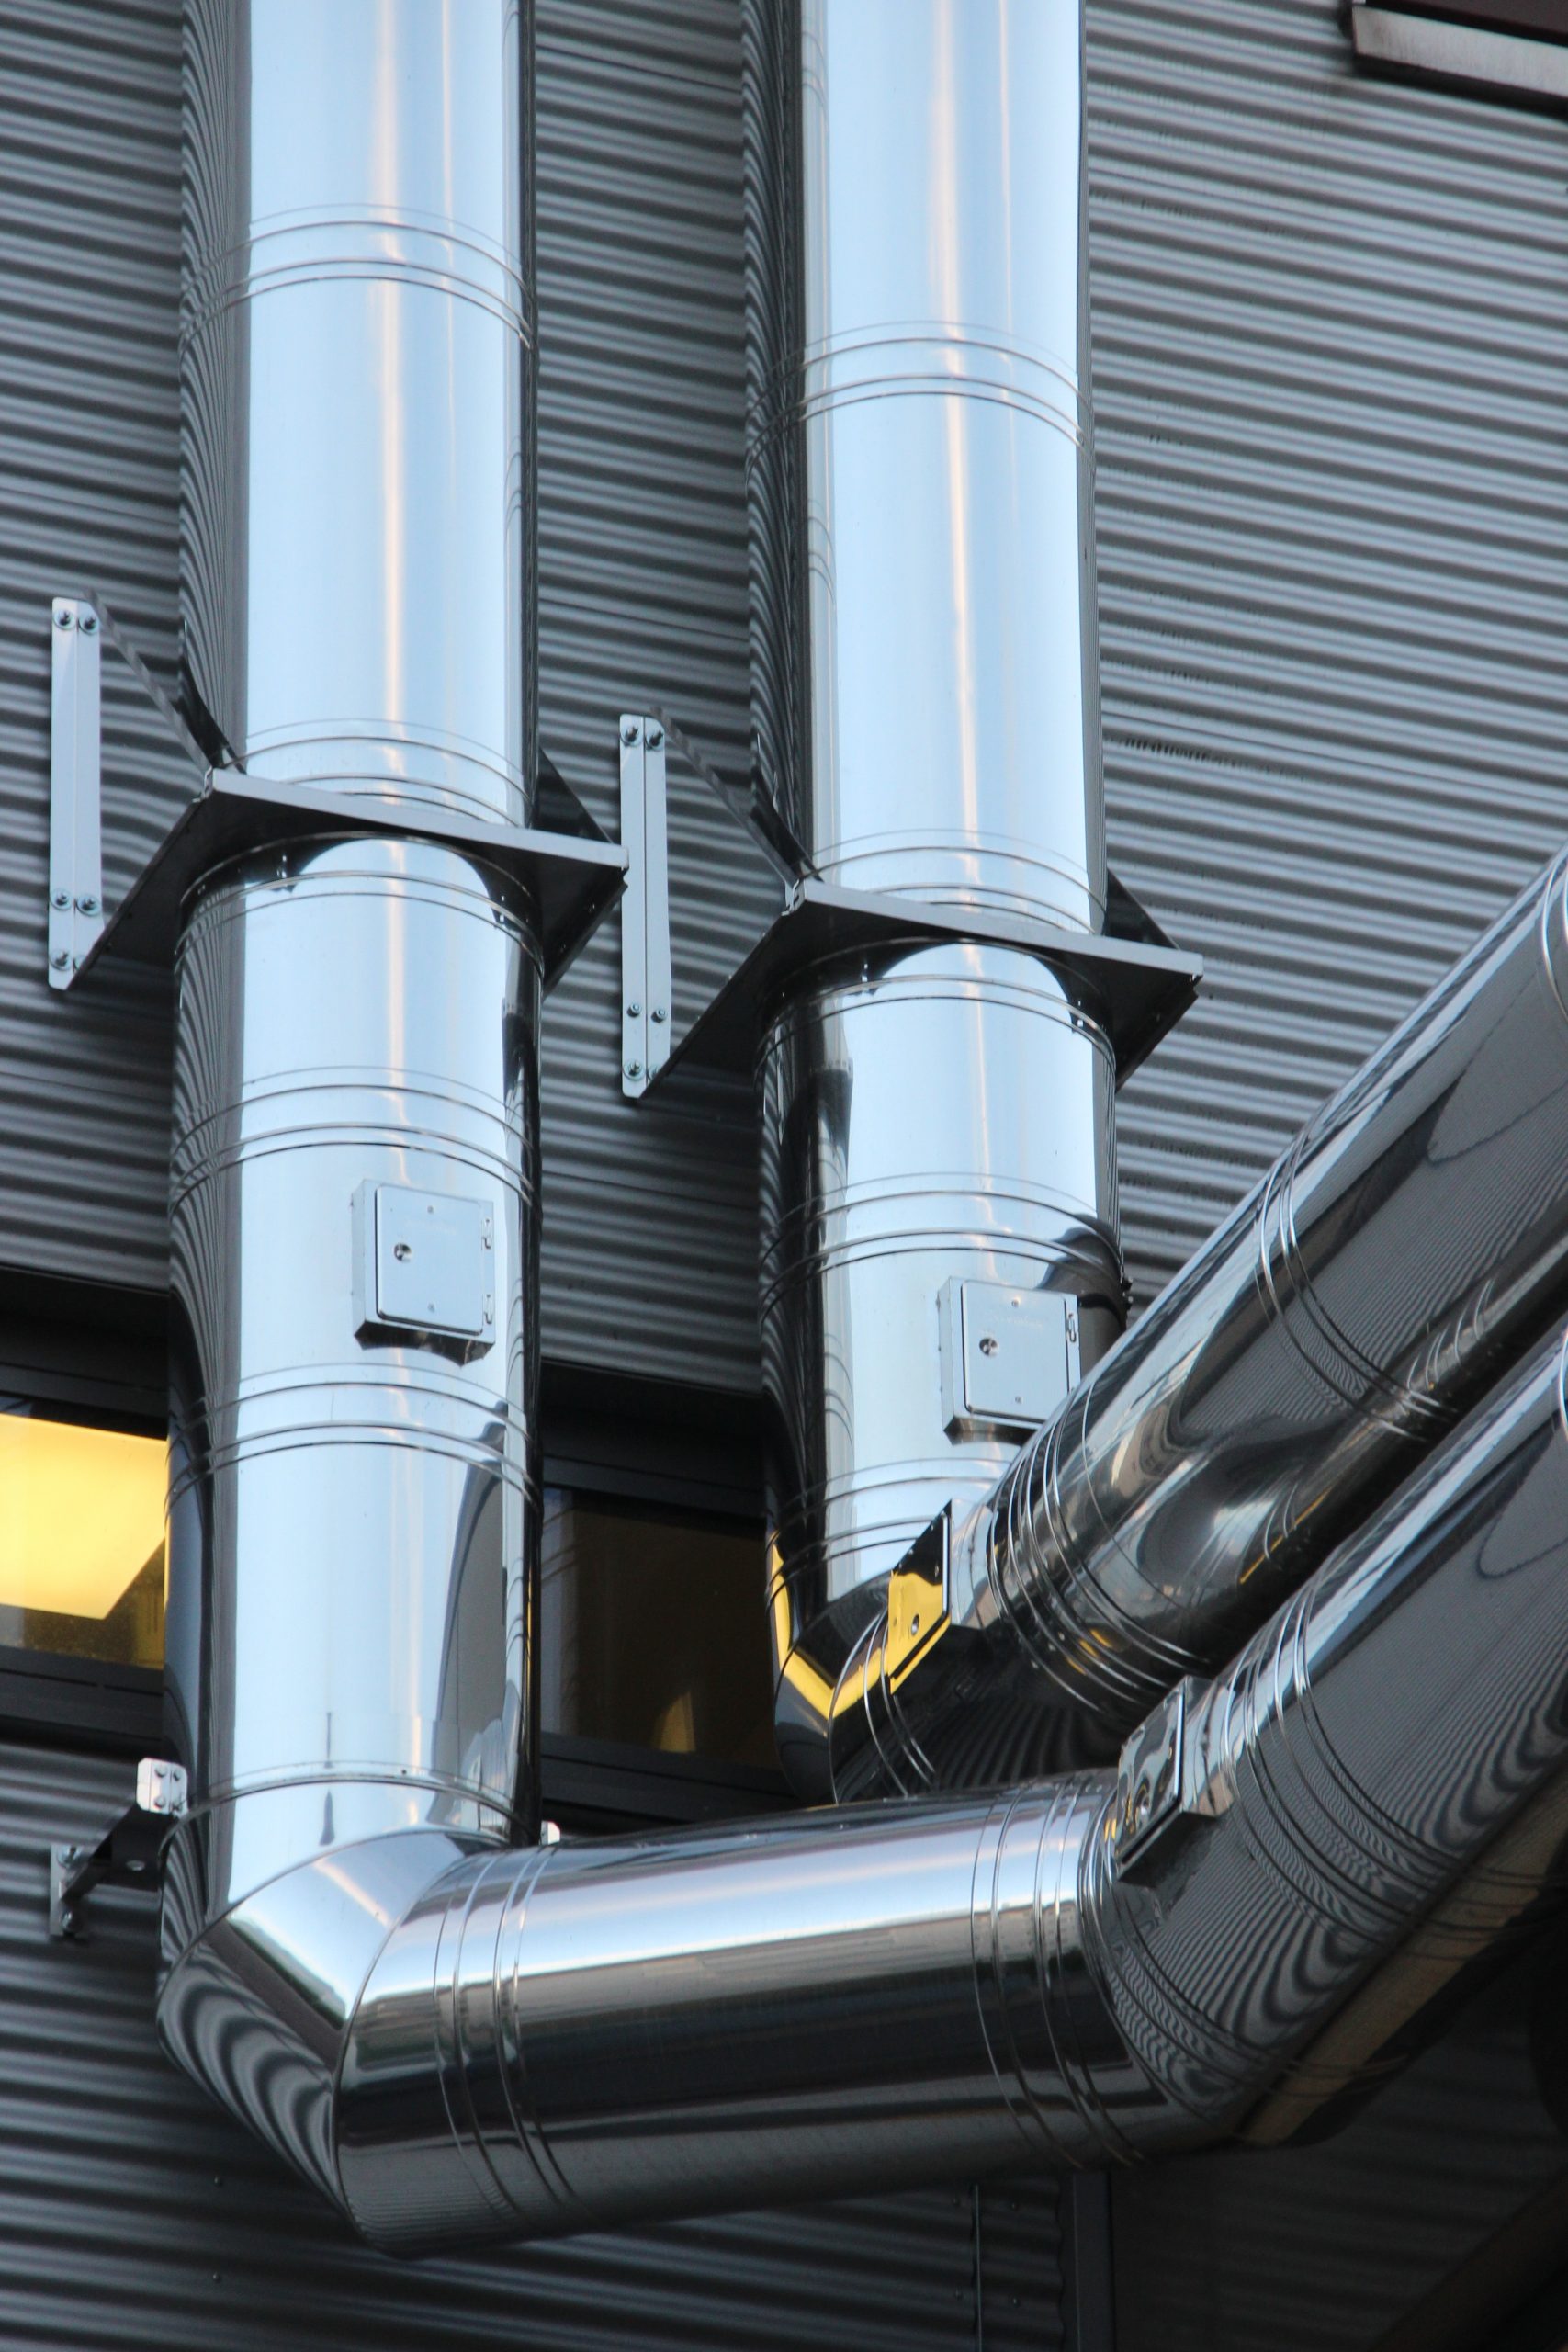 Large silver ducts